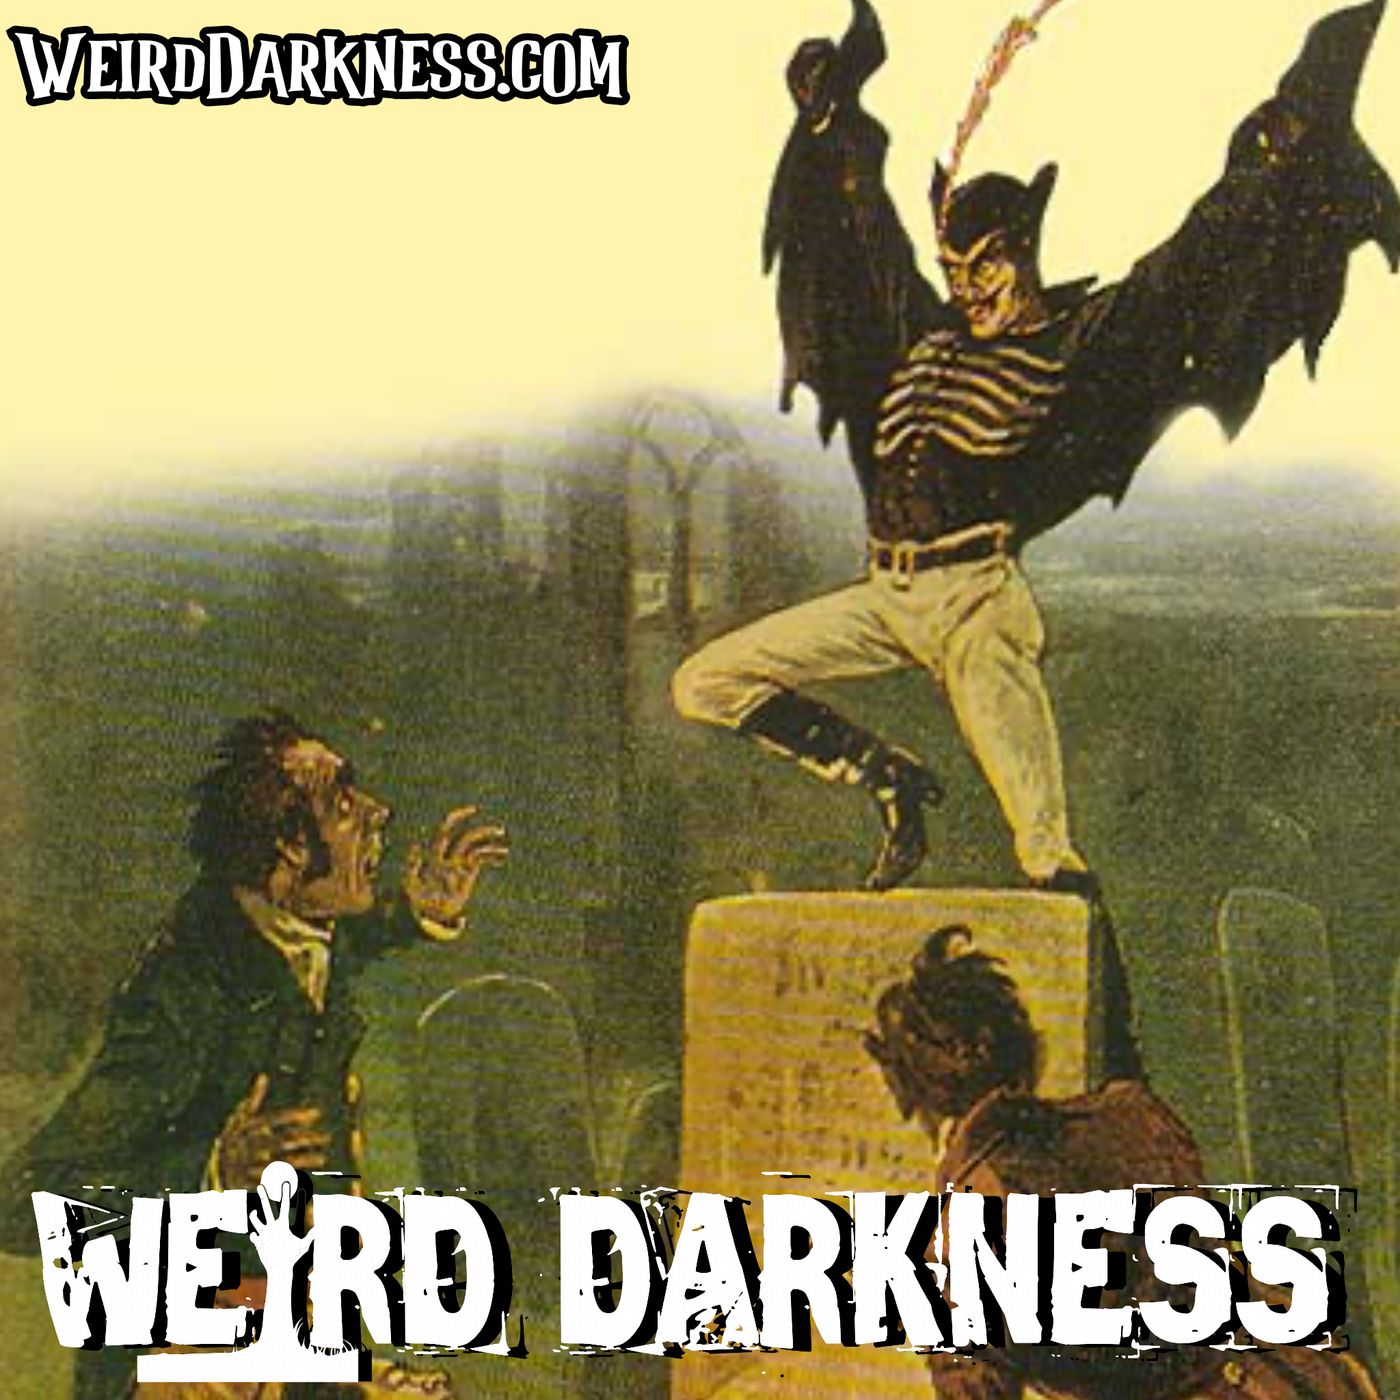 “THE RETURN OF SPRING HEELED JACK” and More True Paranormal Stories! #WeirdDarkness